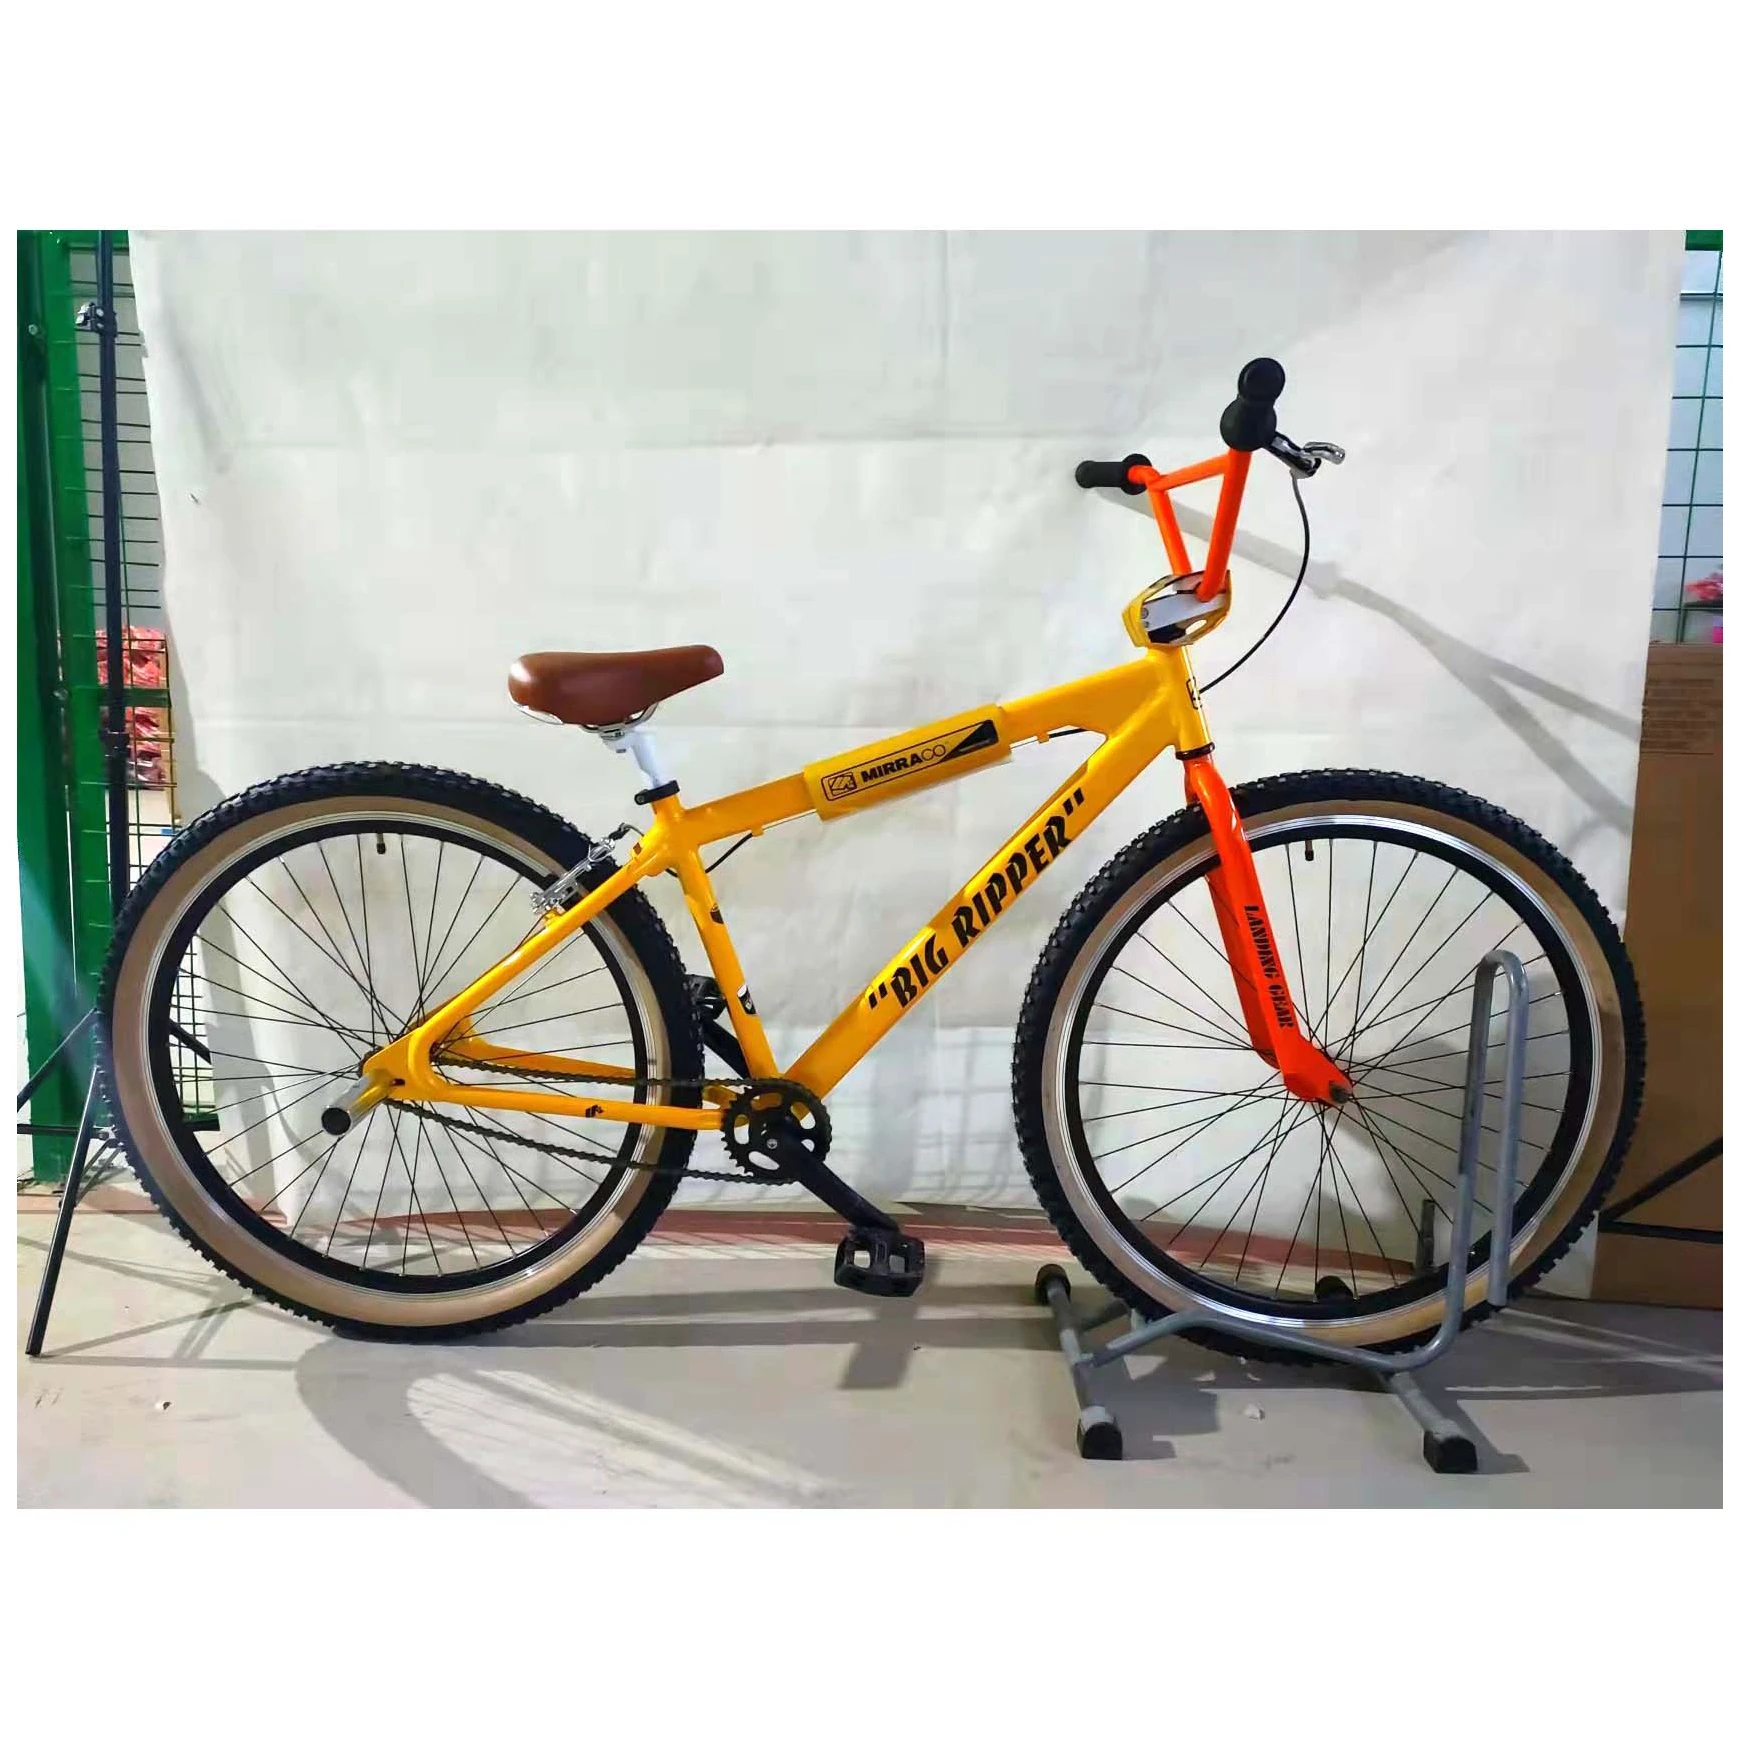 Made in china superior quality aluminum alloy city mountain bike